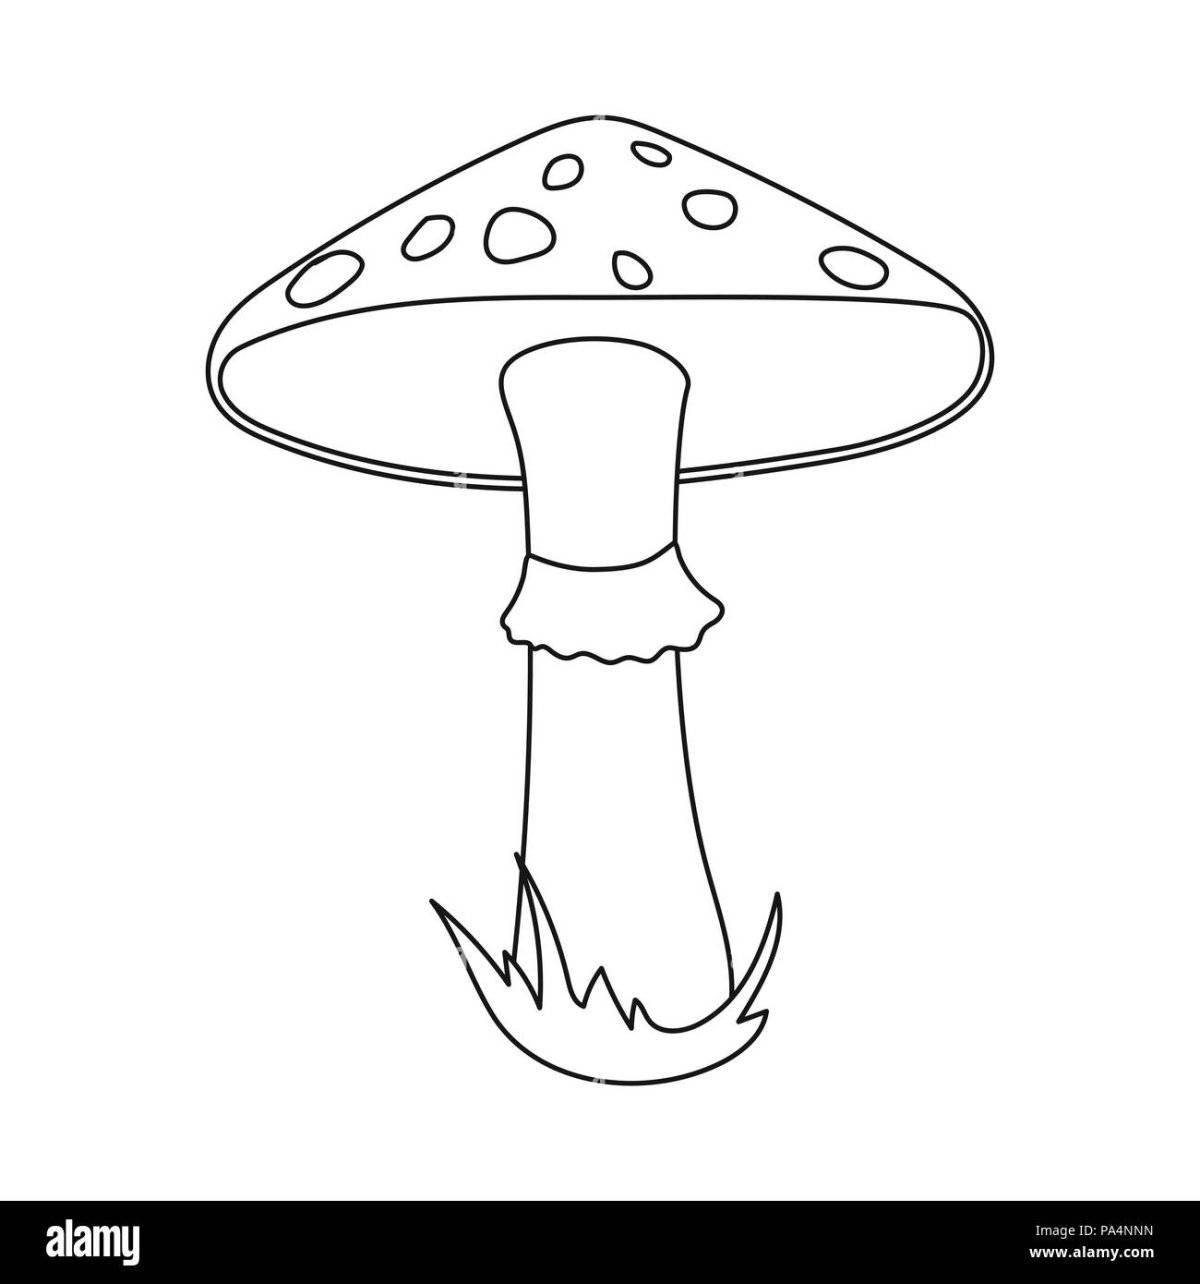 Coloring book live fly agaric frog